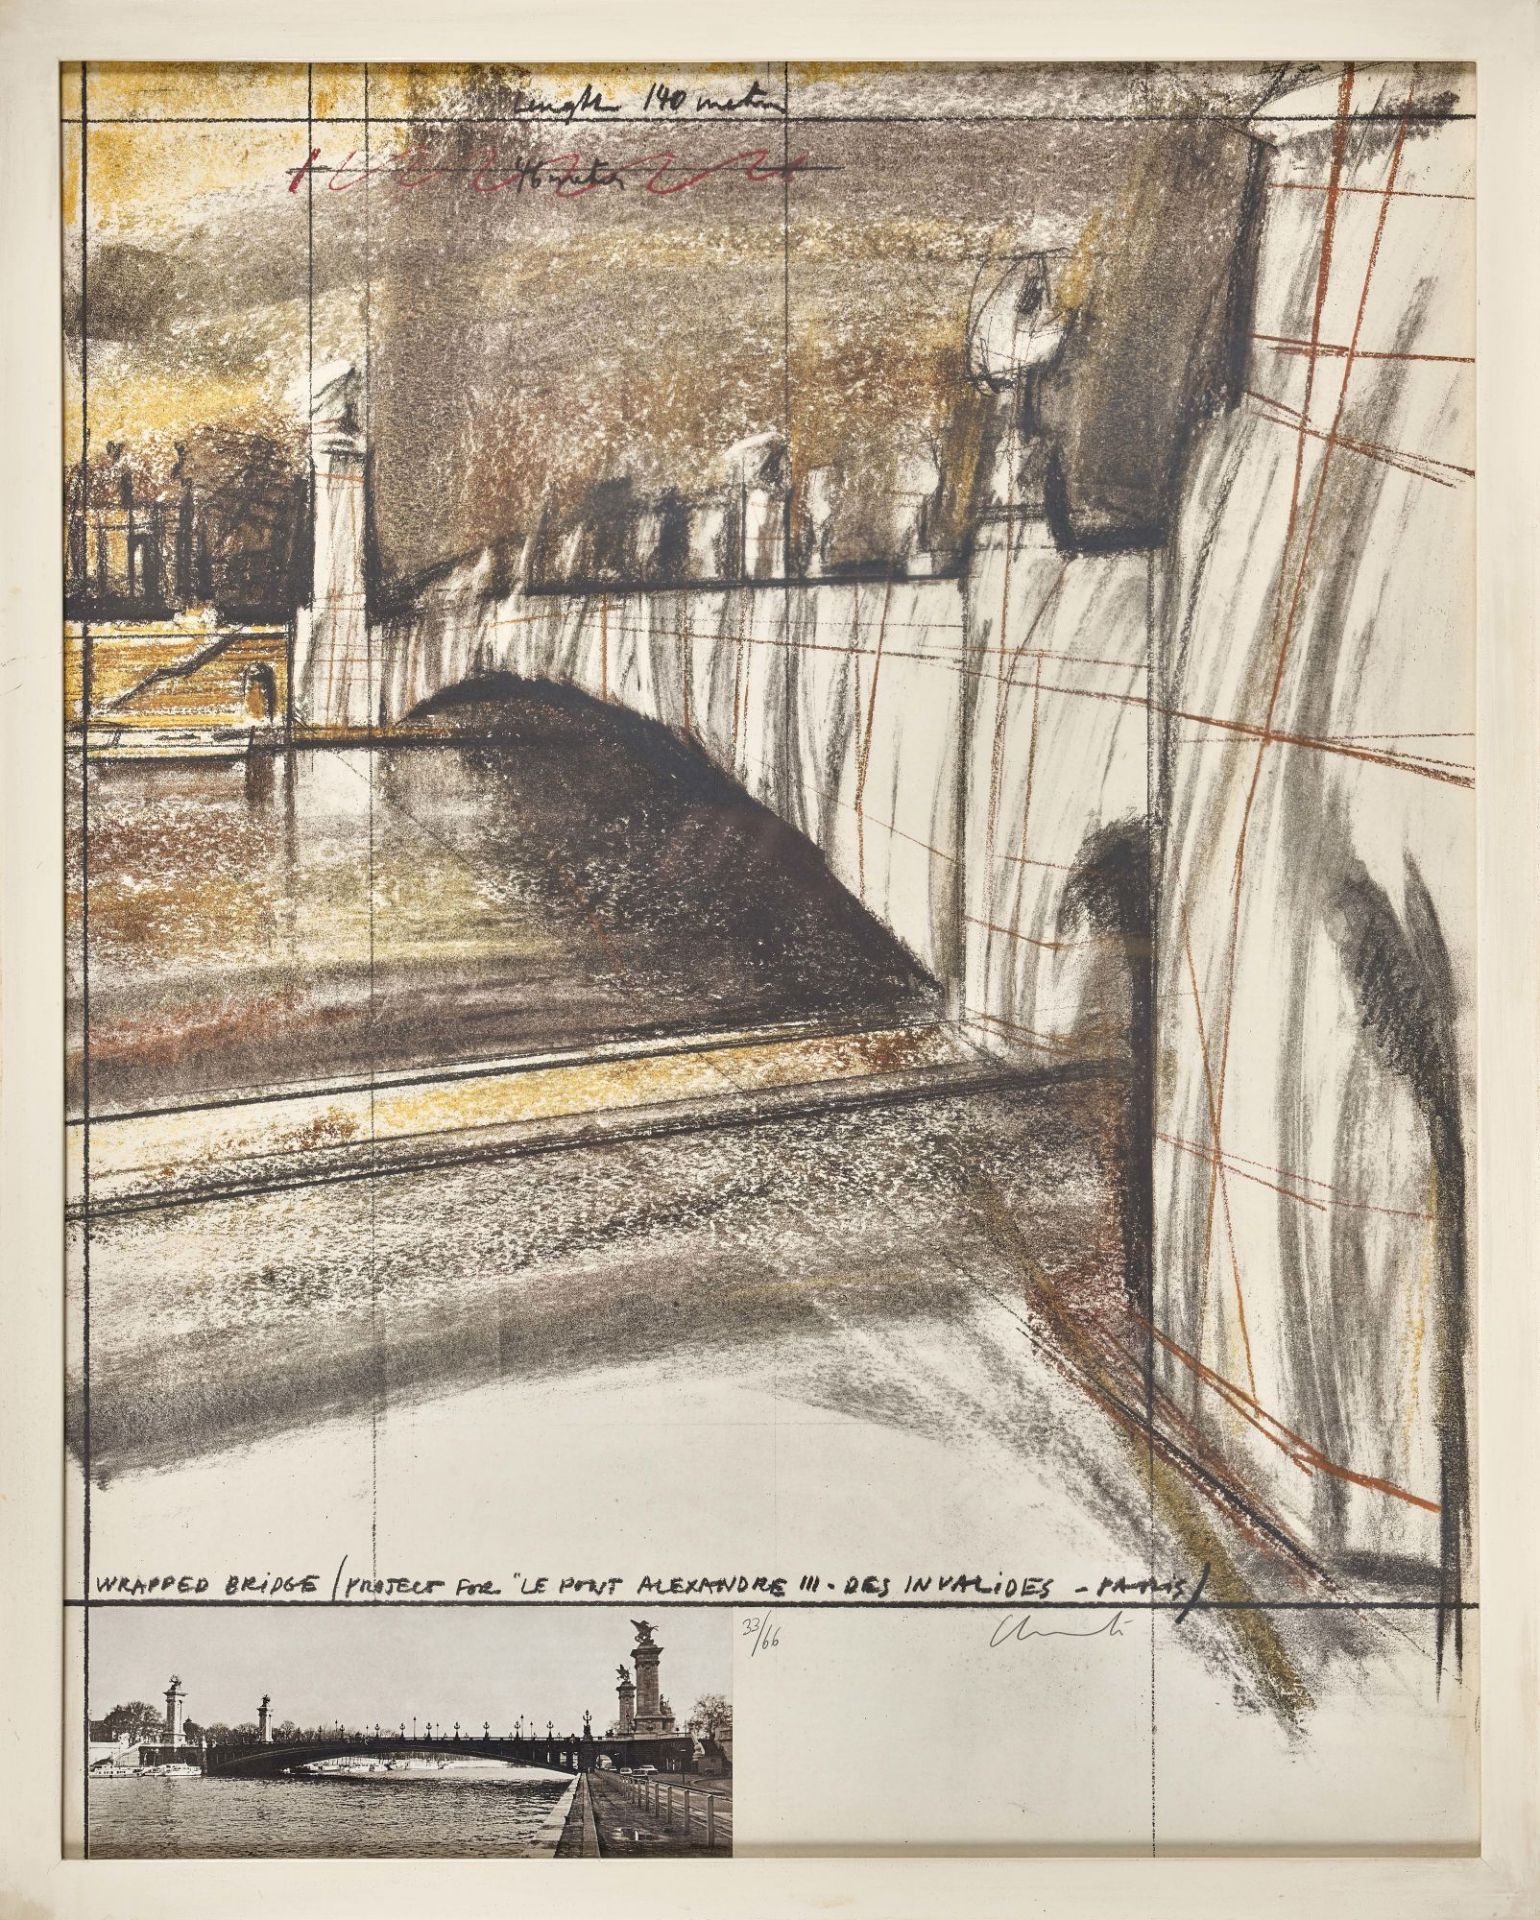 CHRISTO (EIGTL. JAVACHEFF, CHRISTO): "Wrapped Bridge / Project for Le pont Alexandre III des ... - Image 2 of 2